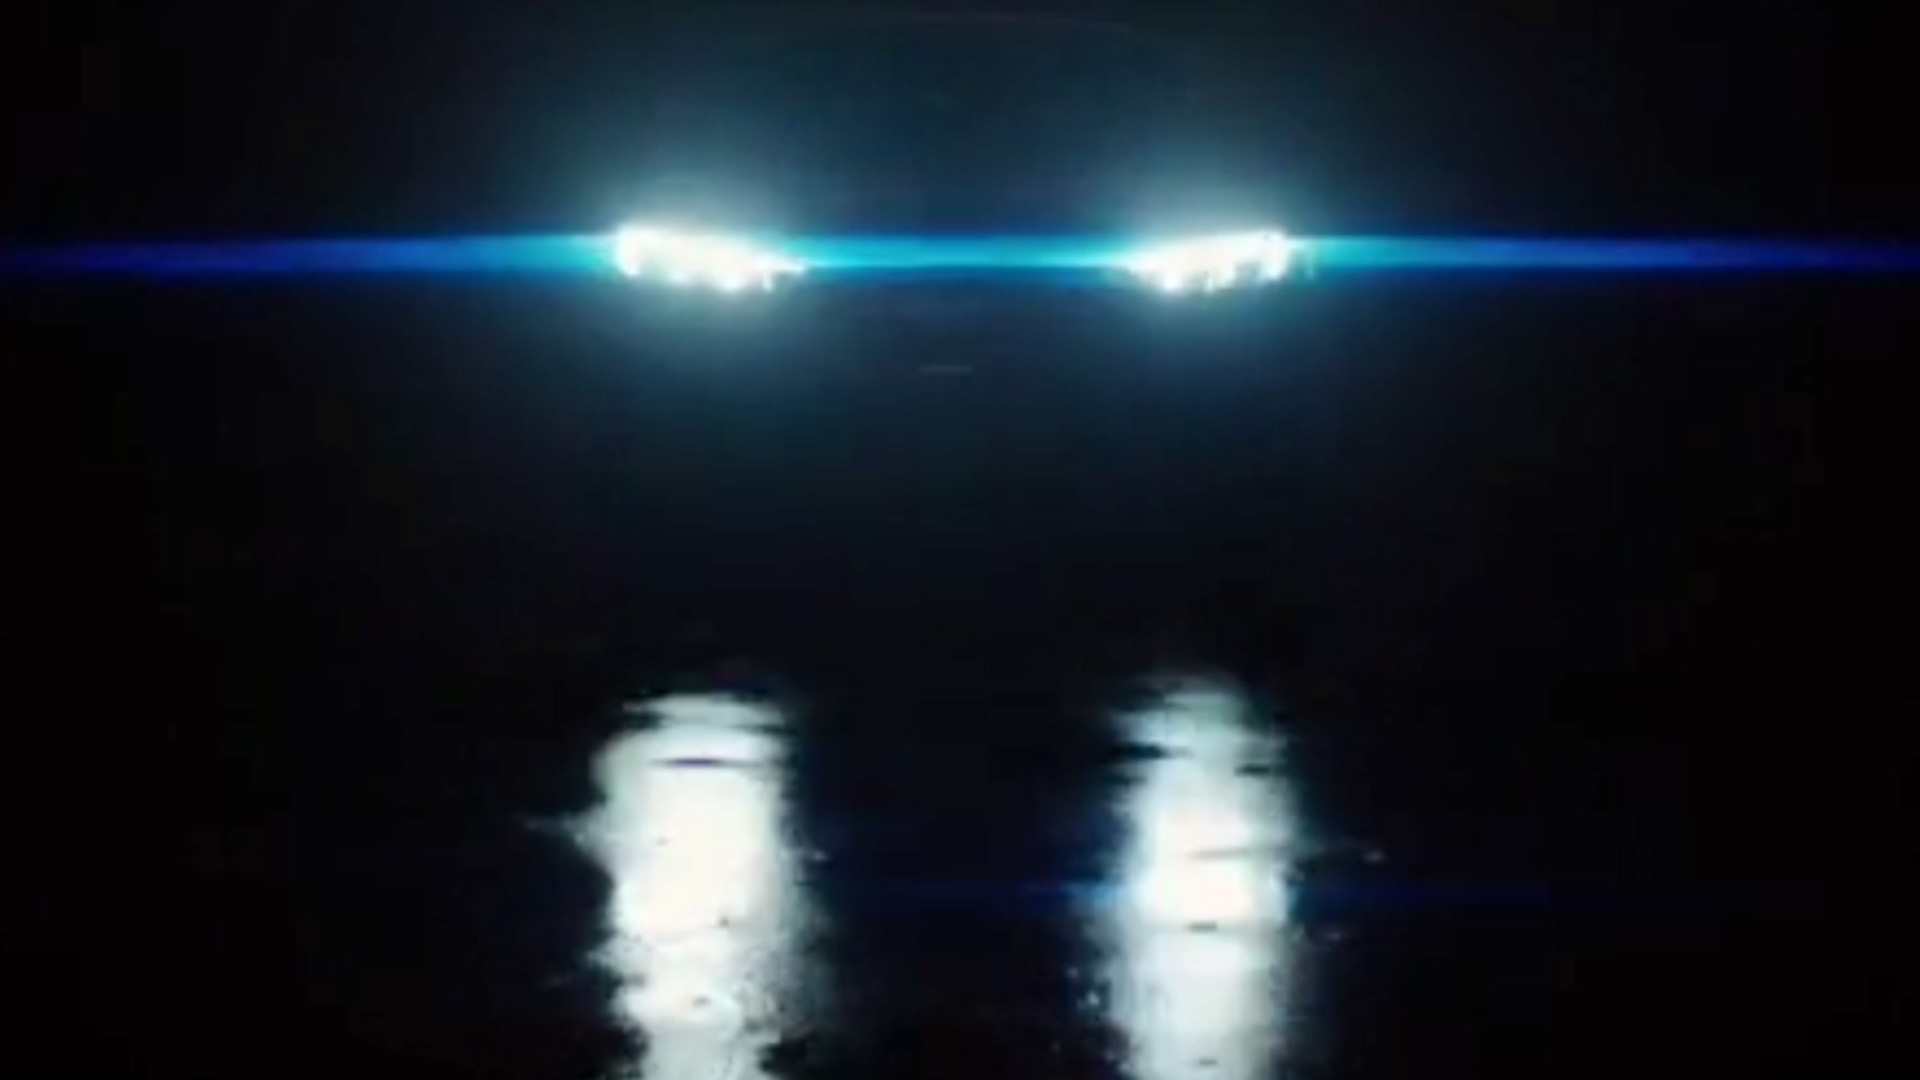 Teaser for Ford Mustang Mach-E debuting at 2019 Los Angeles Auto Show